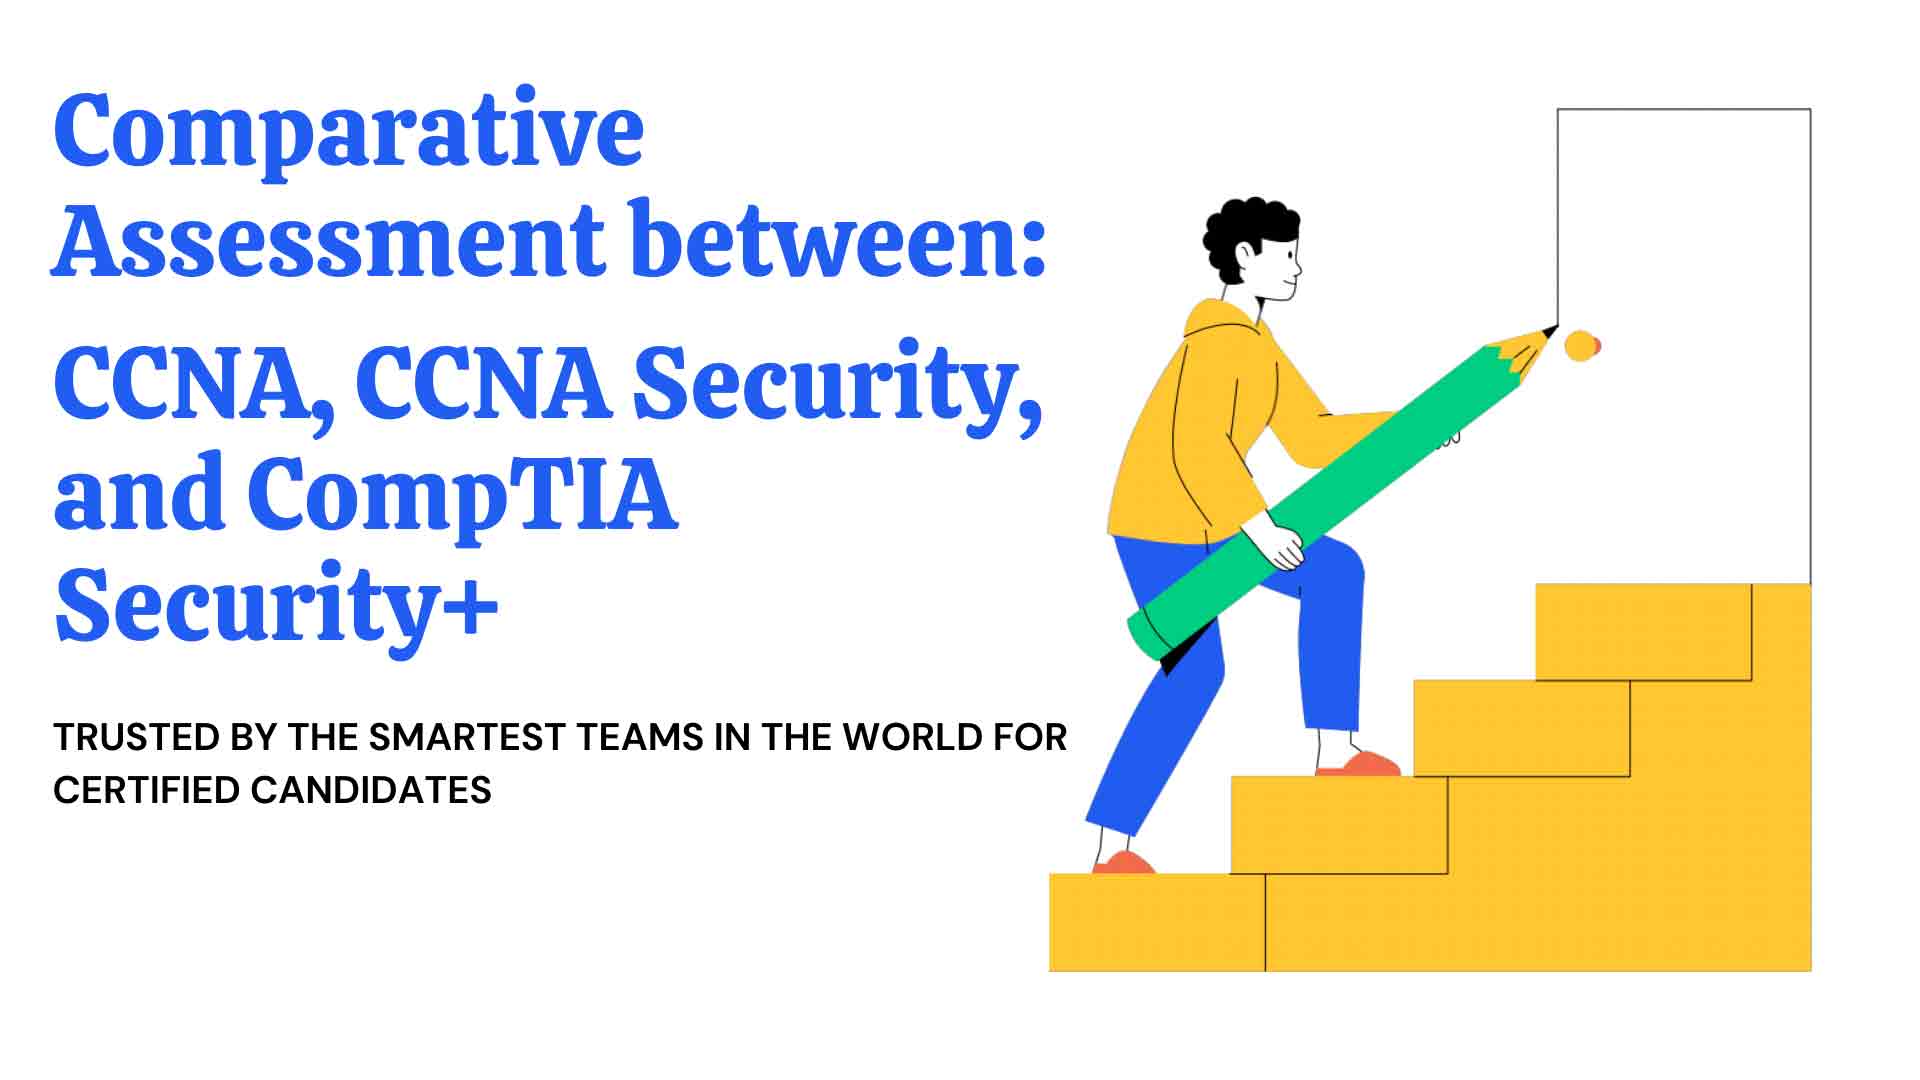 Comparative Assessment between CCNA, CCNA Security, and CompTIA Security+